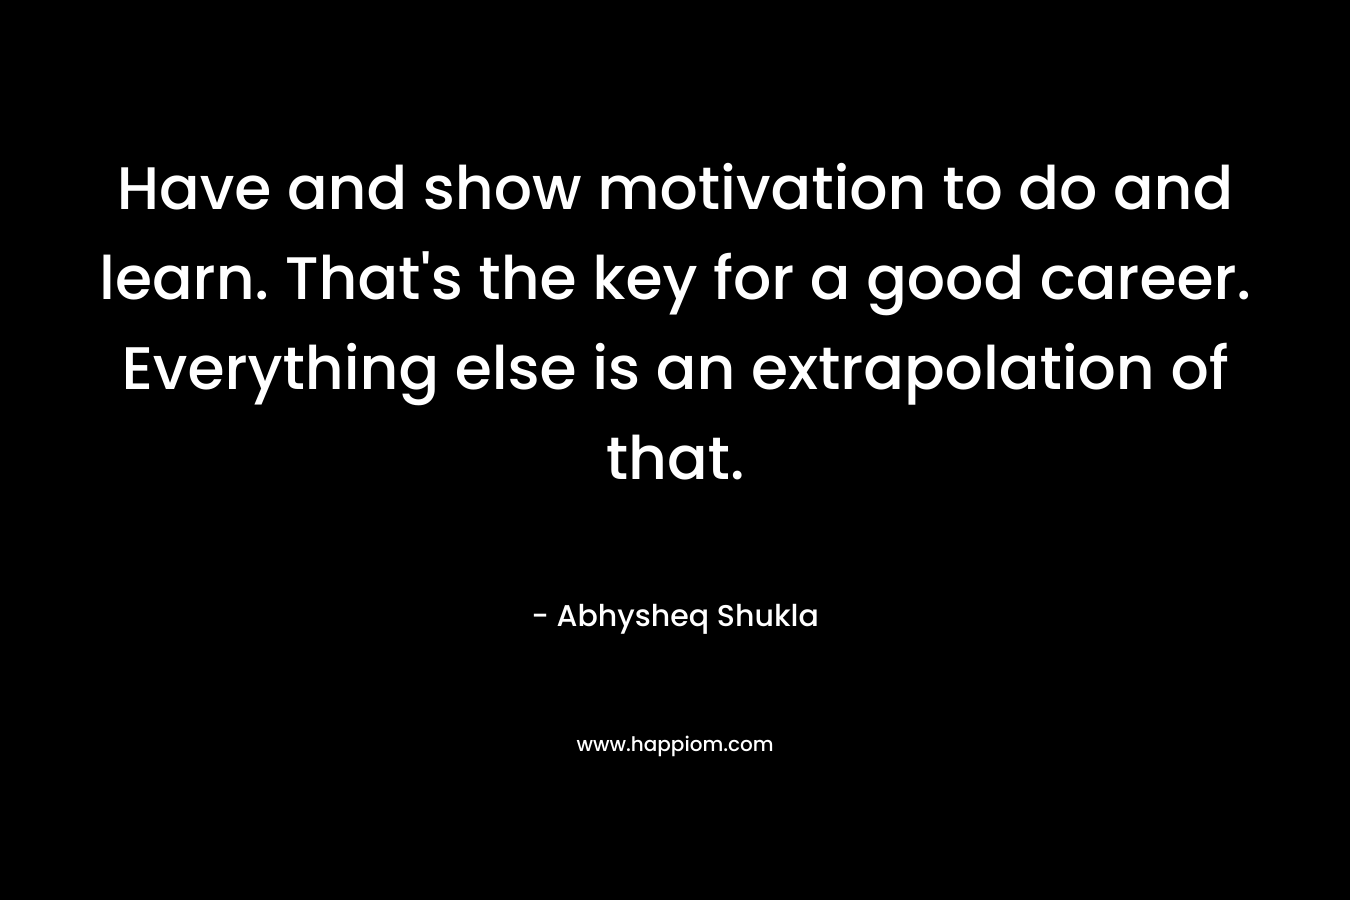 Have and show motivation to do and learn. That's the key for a good career. Everything else is an extrapolation of that.